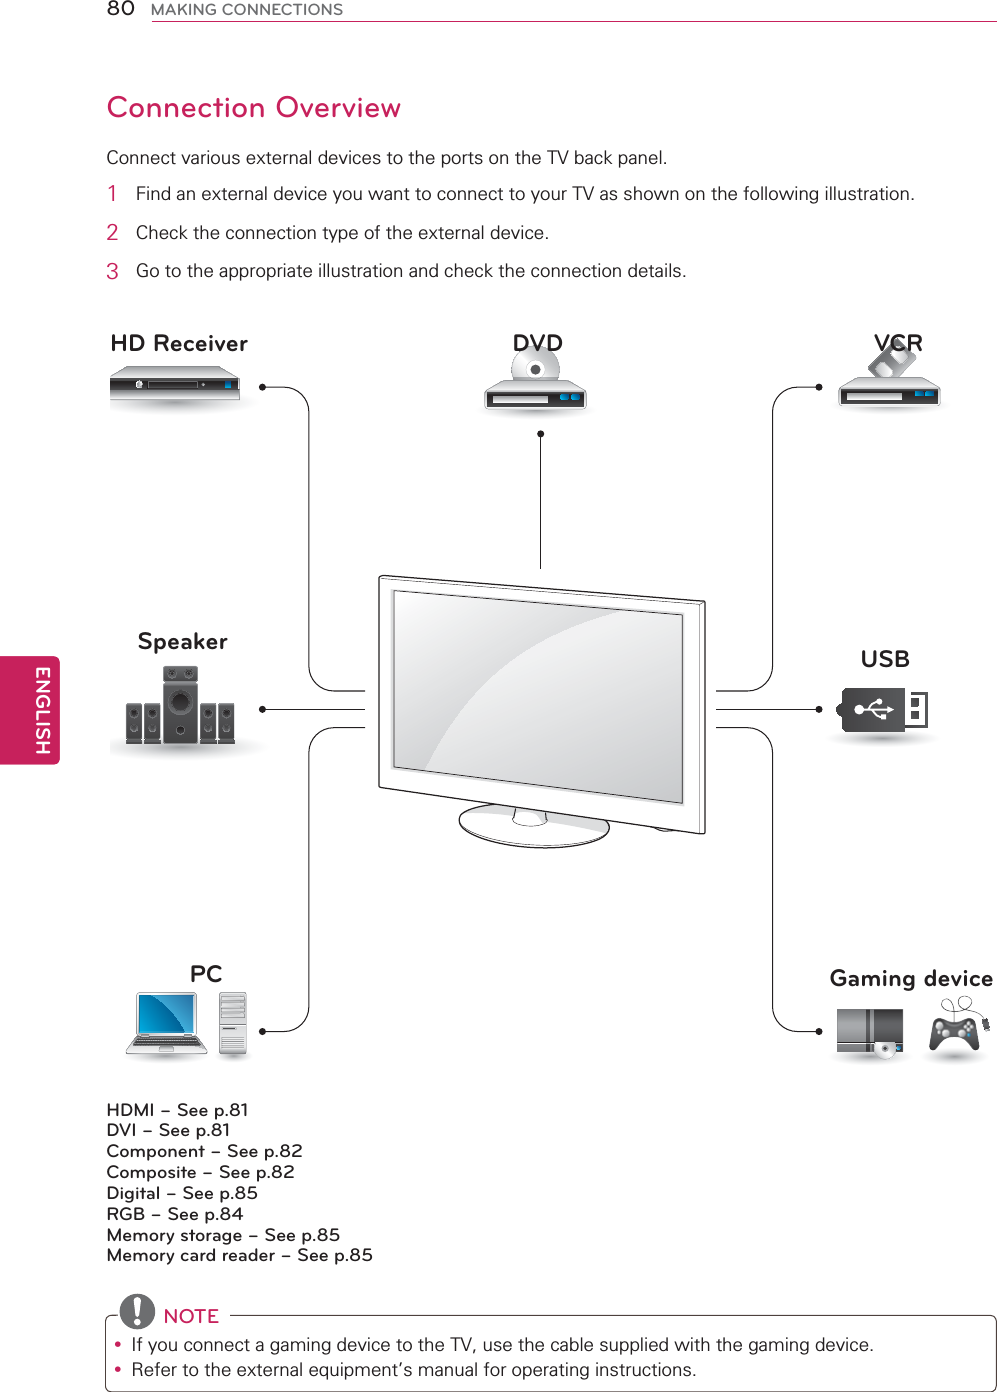 80ENGENGLISHMAKING CONNECTIONSConnection OverviewConnect various external devices to the ports on the TV back panel.1  Find an external device you want to connect to your TV as shown on the following illustration.2  Check the connection type of the external device.3  Go to the appropriate illustration and check the connection details. NOTEy If you connect a gaming device to the TV, use the cable supplied with the gaming device.y Refer to the external equipment’s manual for operating instructions.HDMI – See p.81DVI – See p.81Component – See p.82Composite – See p.82Digital – See p.85RGB – See p.84Memory storage – See p.85Memory card reader – See p.85HD Receiver DVD VCRSpeaker USBPC Gaming device